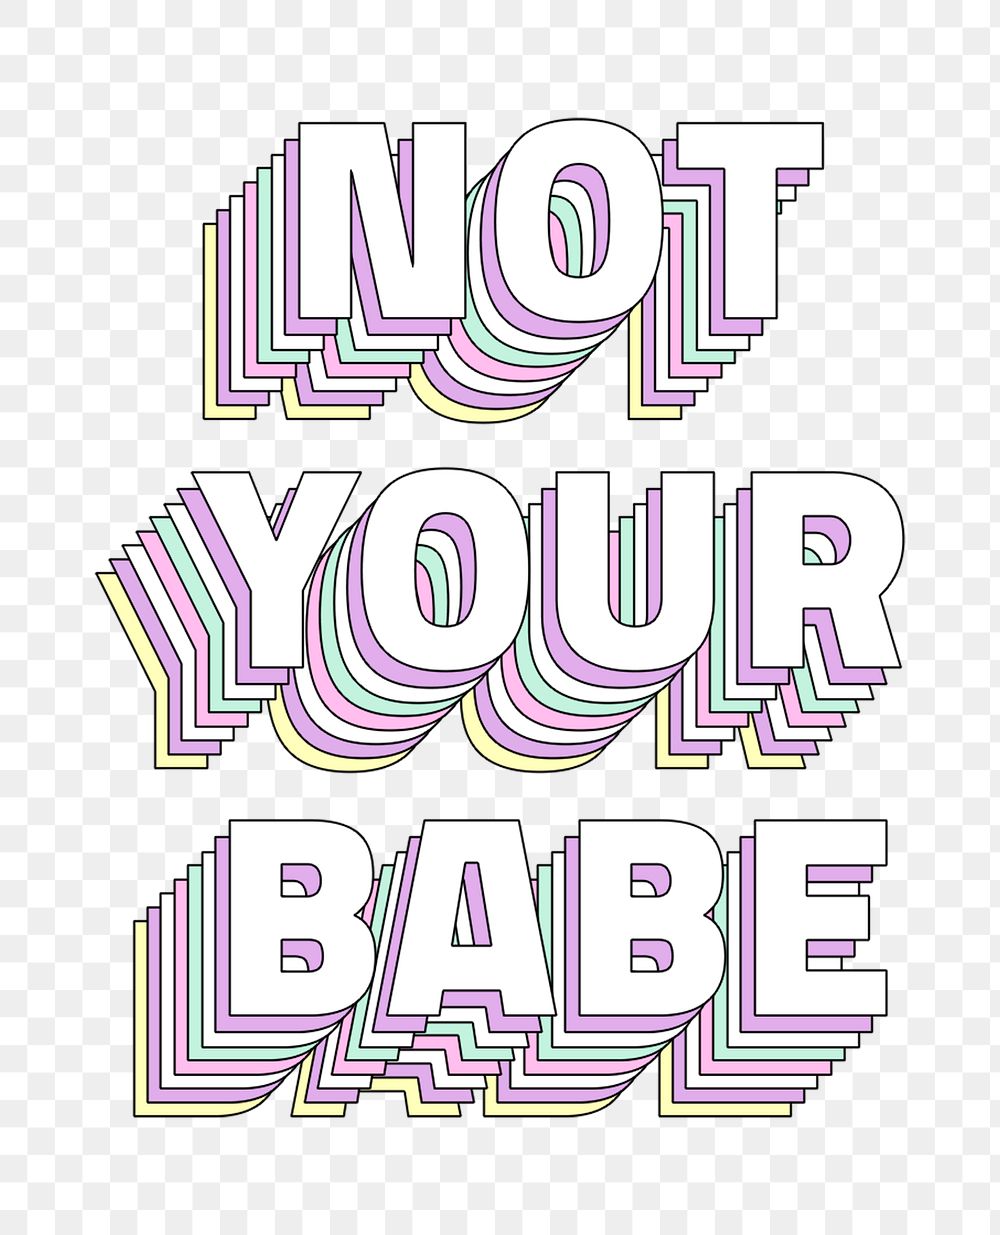 Not your babe layered png typography retro word